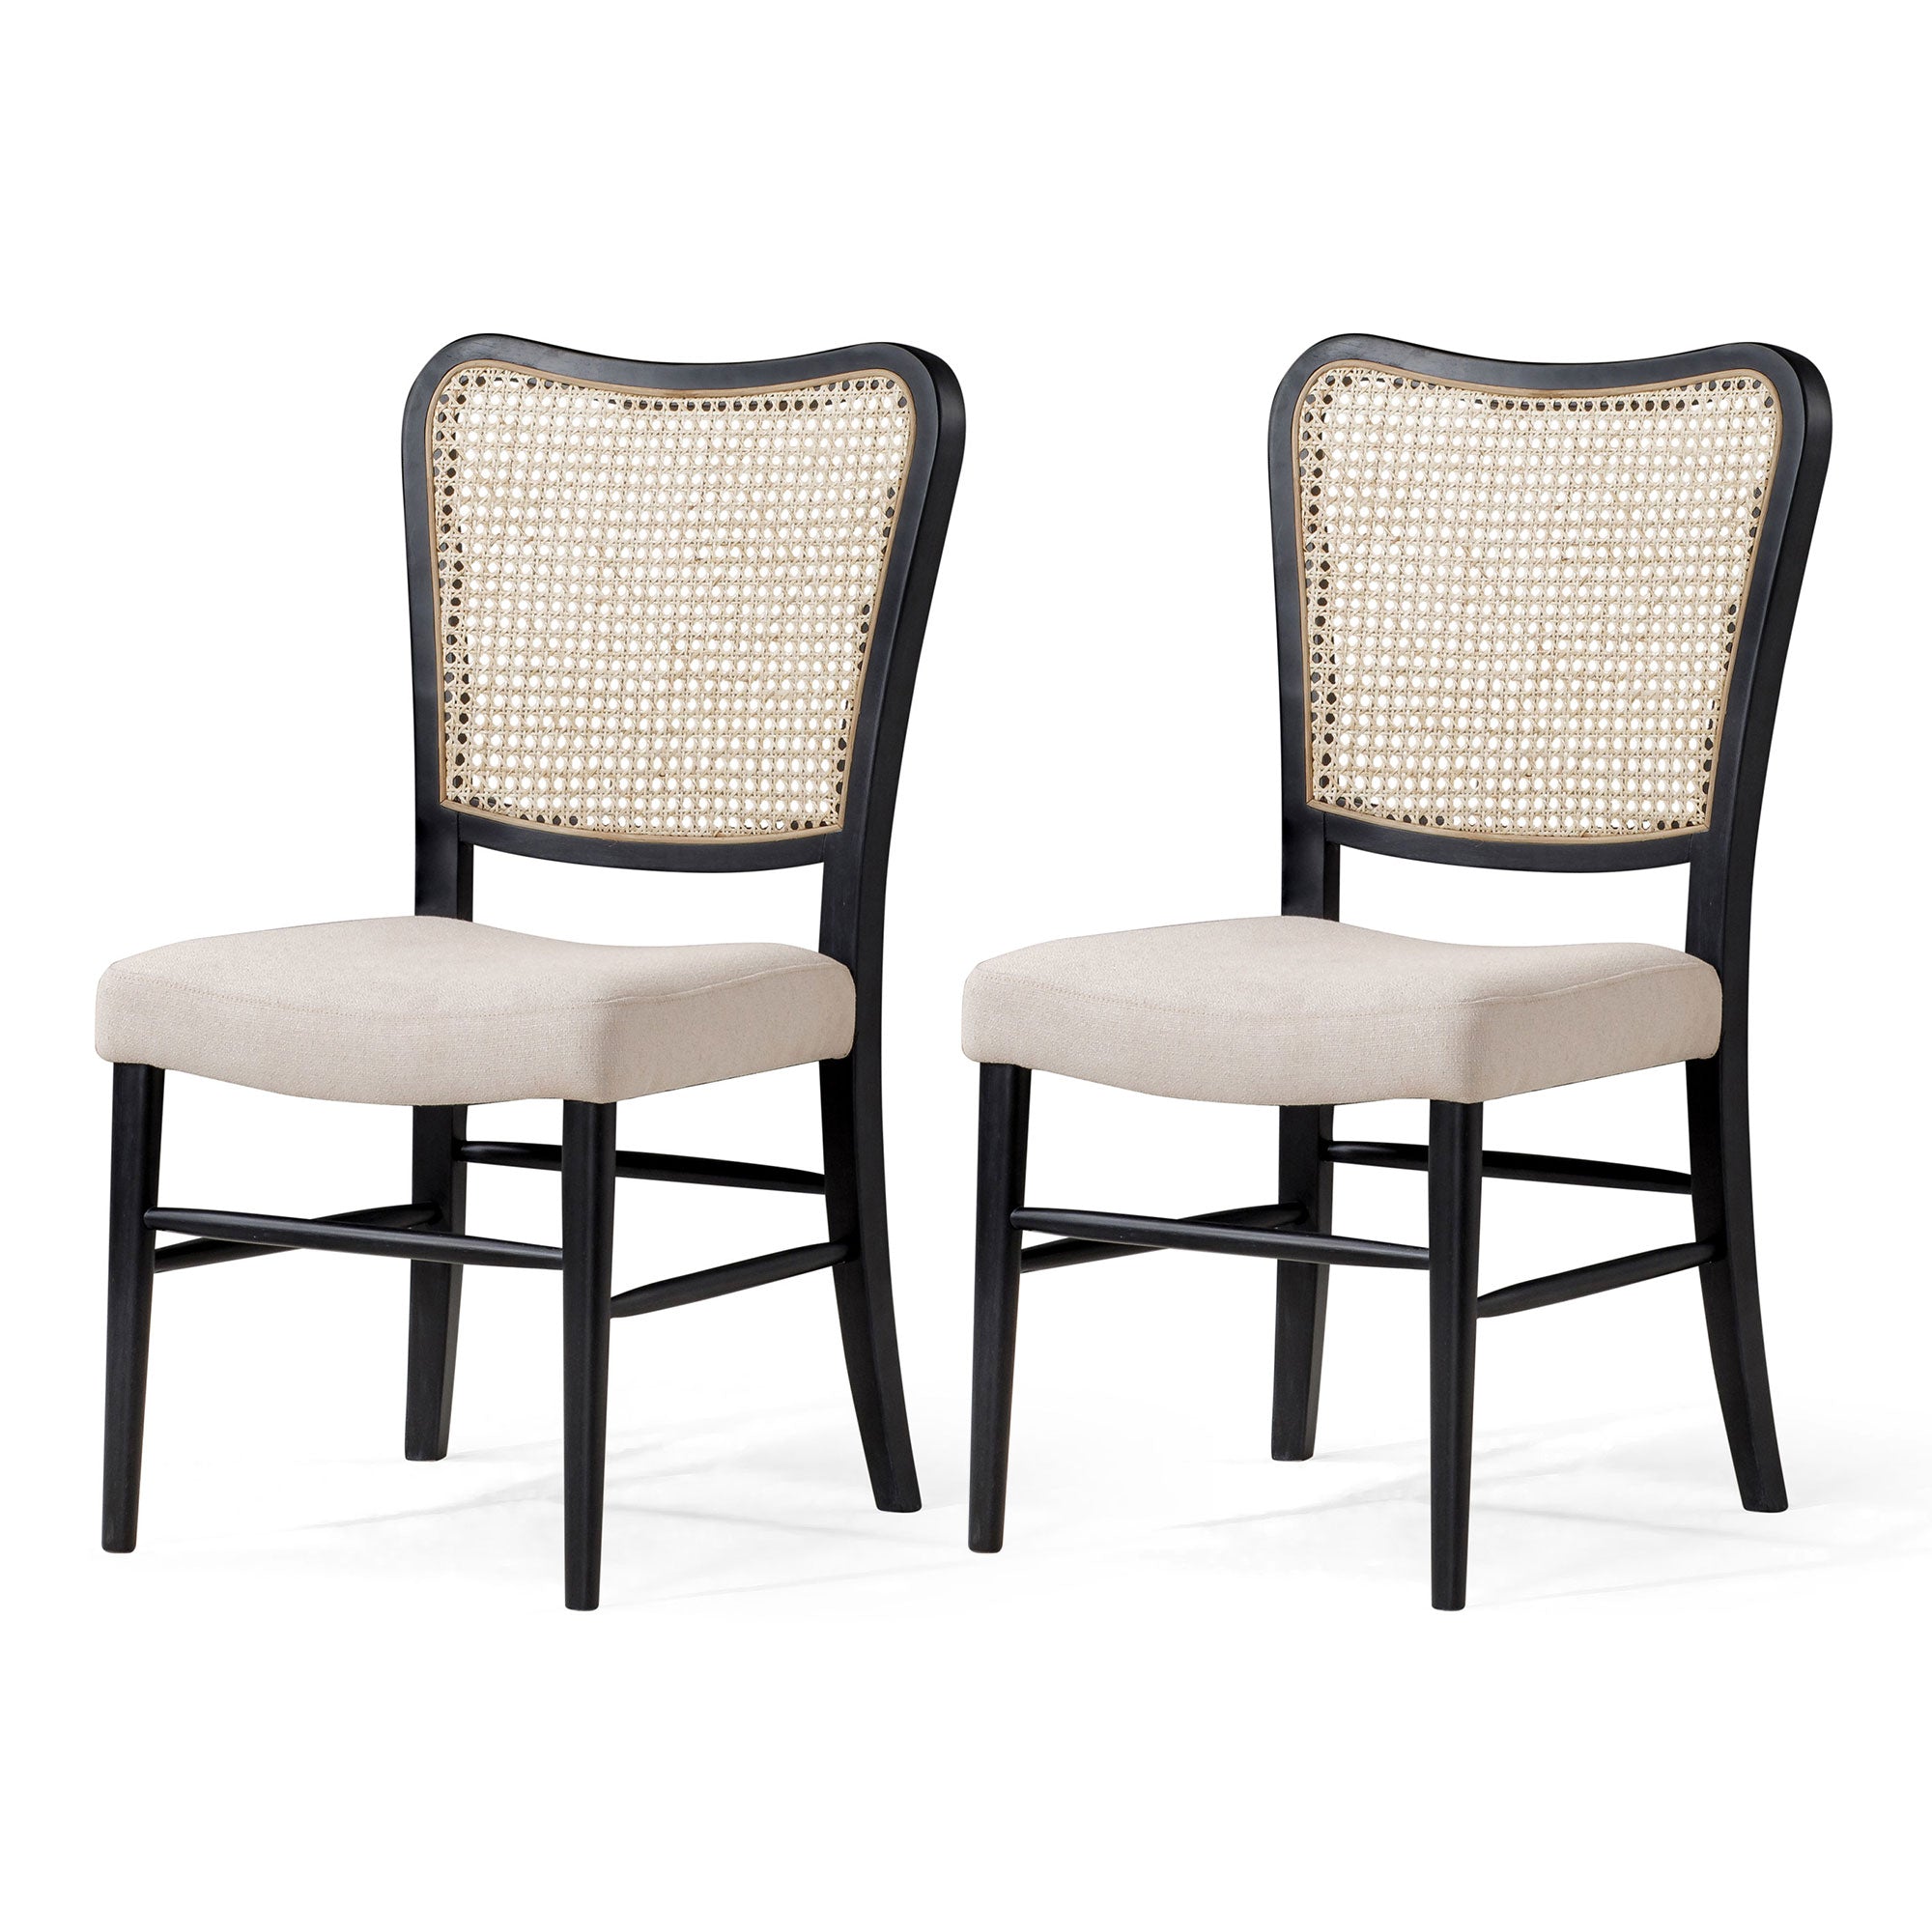 Maven-Lane-Vera-Wooden-Dining-Chair,-Antique-Black-&-Dove-Weave-Fabric,-Set-of-2-Kitchen-&-Dining-Room-Chairs